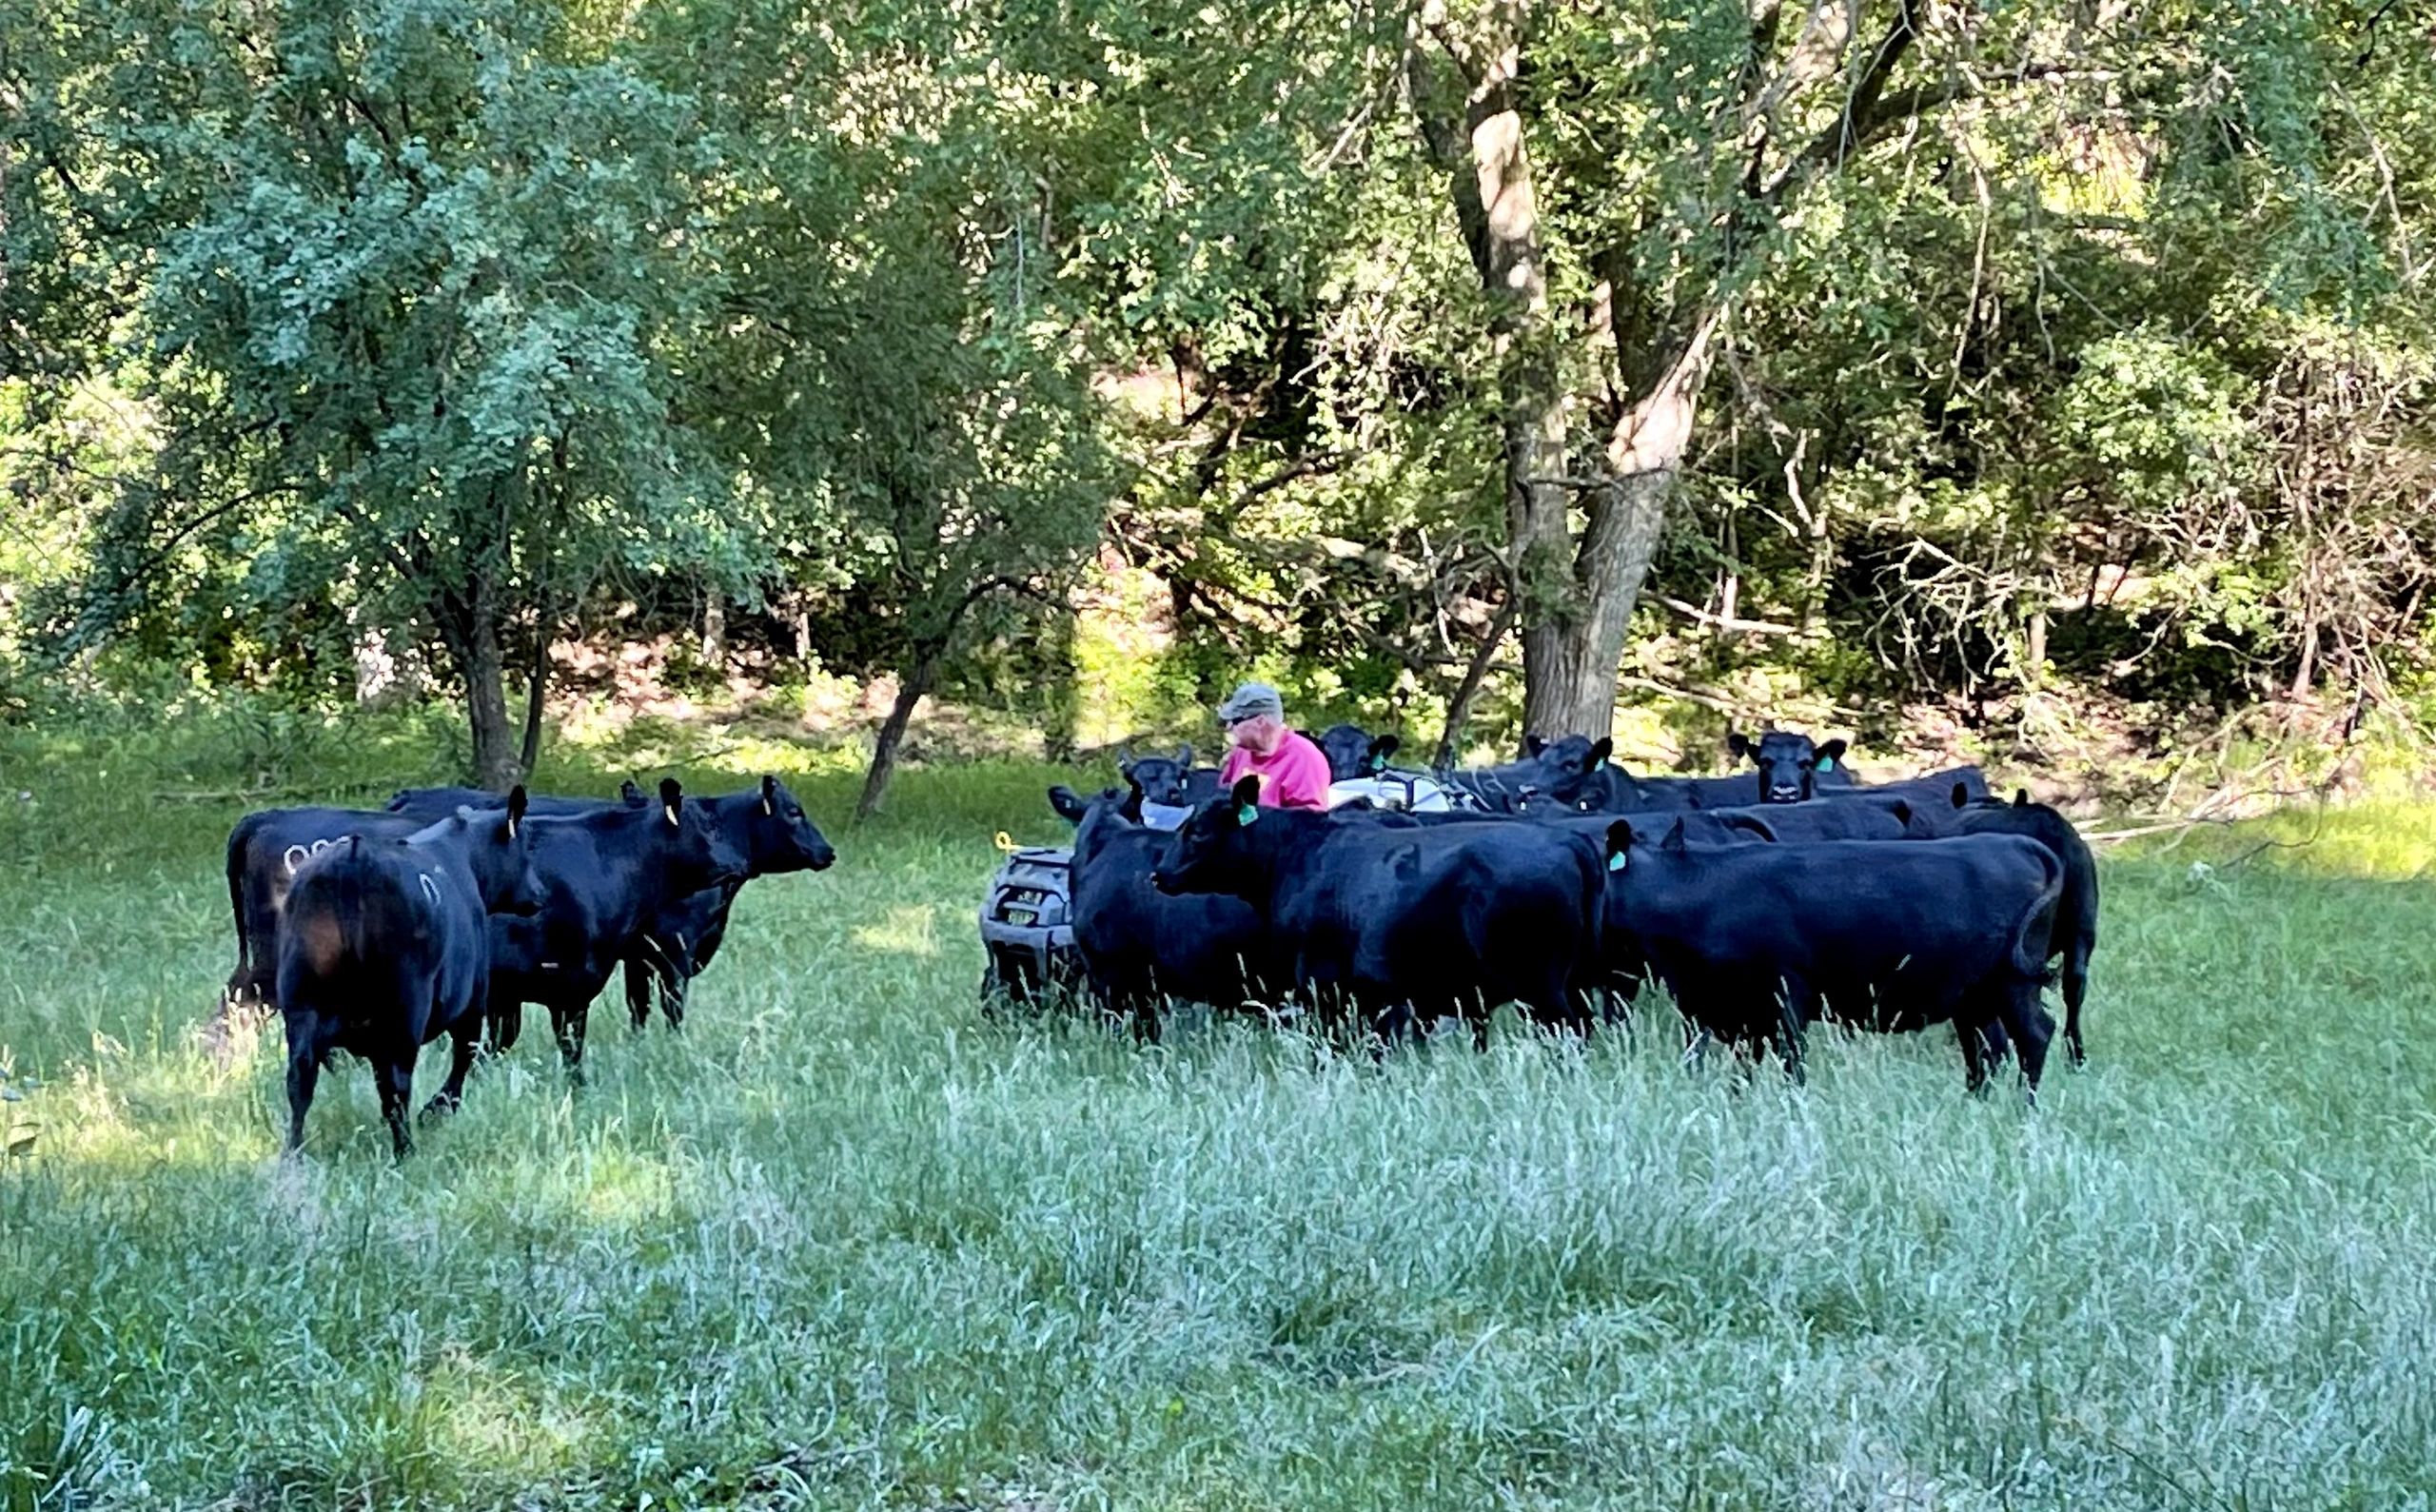 Jim and the heifers.  Quite a tame bunch.